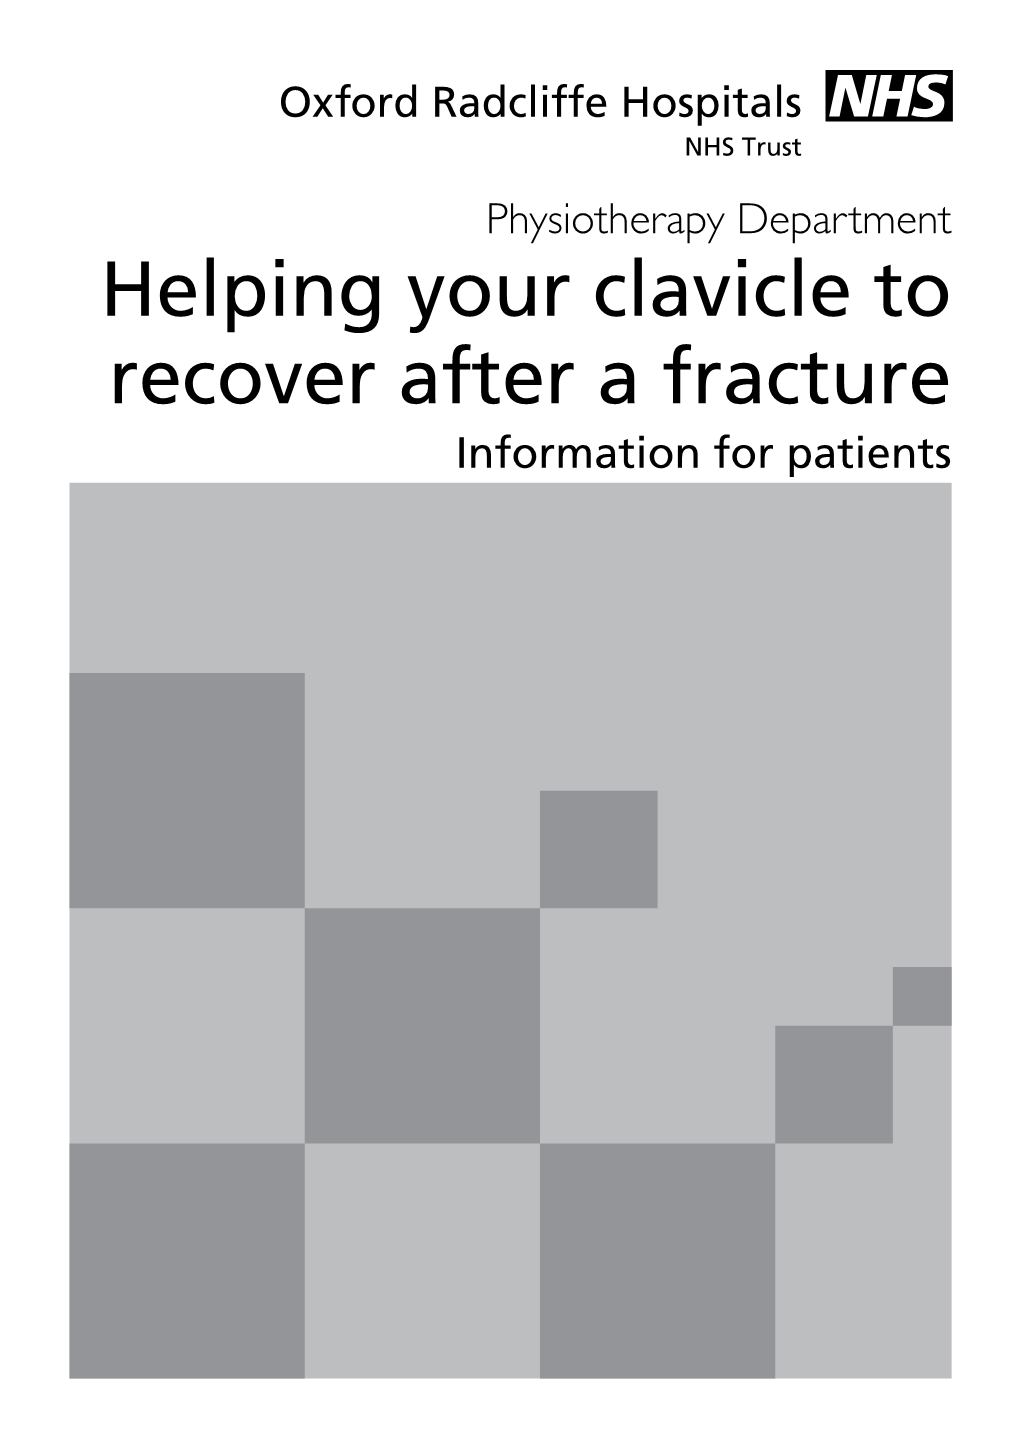 Helping Your Clavicle to Recover After a Fracture